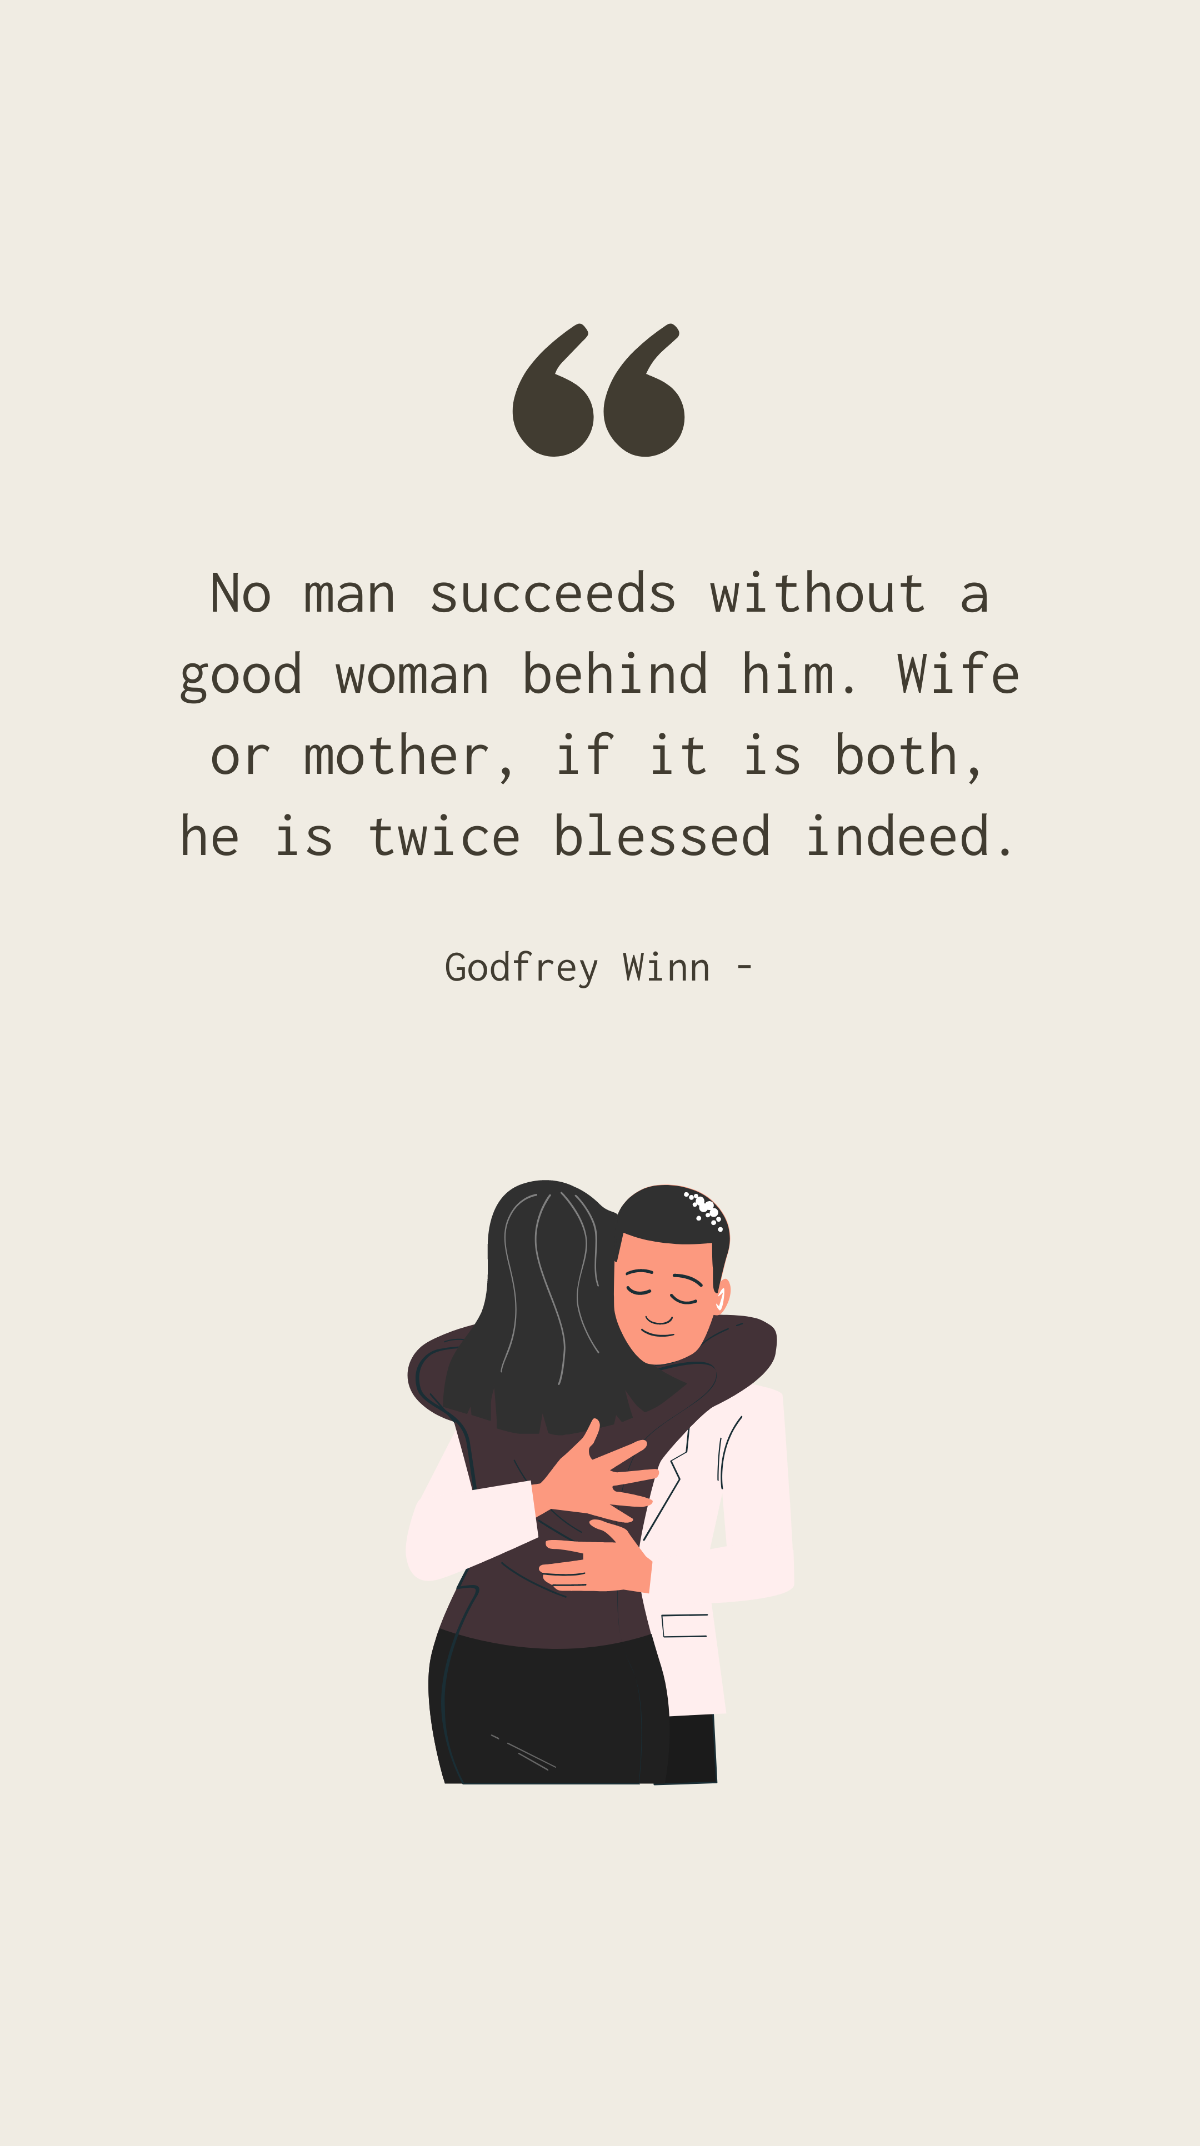 Godfrey Winn - No man succeeds without a good woman behind him. Wife or mother, if it is both, he is twice blessed indeed. Template